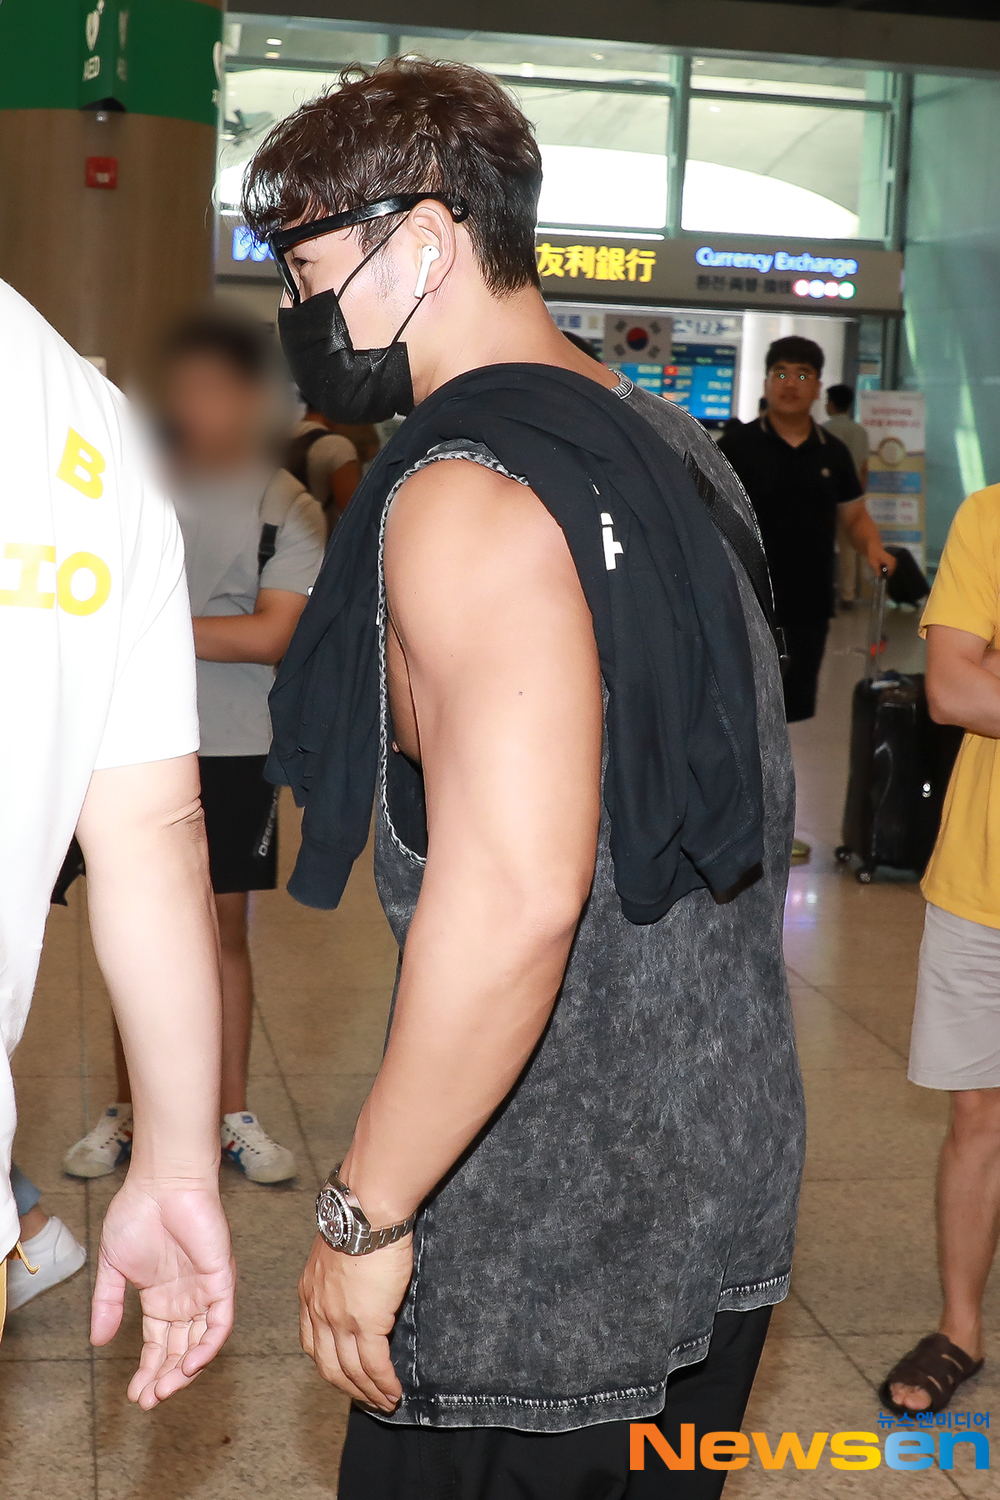 Kim Jong-kook arrived at the Inchon International Airport in Unseo-dong, Jung-gu, Incheon after finishing the overseas schedule of RUNNINGMAN FAN MEETING IN JAKARTA INDONESIA held in Indonesia on August 18th.Kim Jong-kook is leaving the arrival hall.#Running Man #Running ManIncheon Airport #Airport Fashion #ICNAirportkim ki-tae